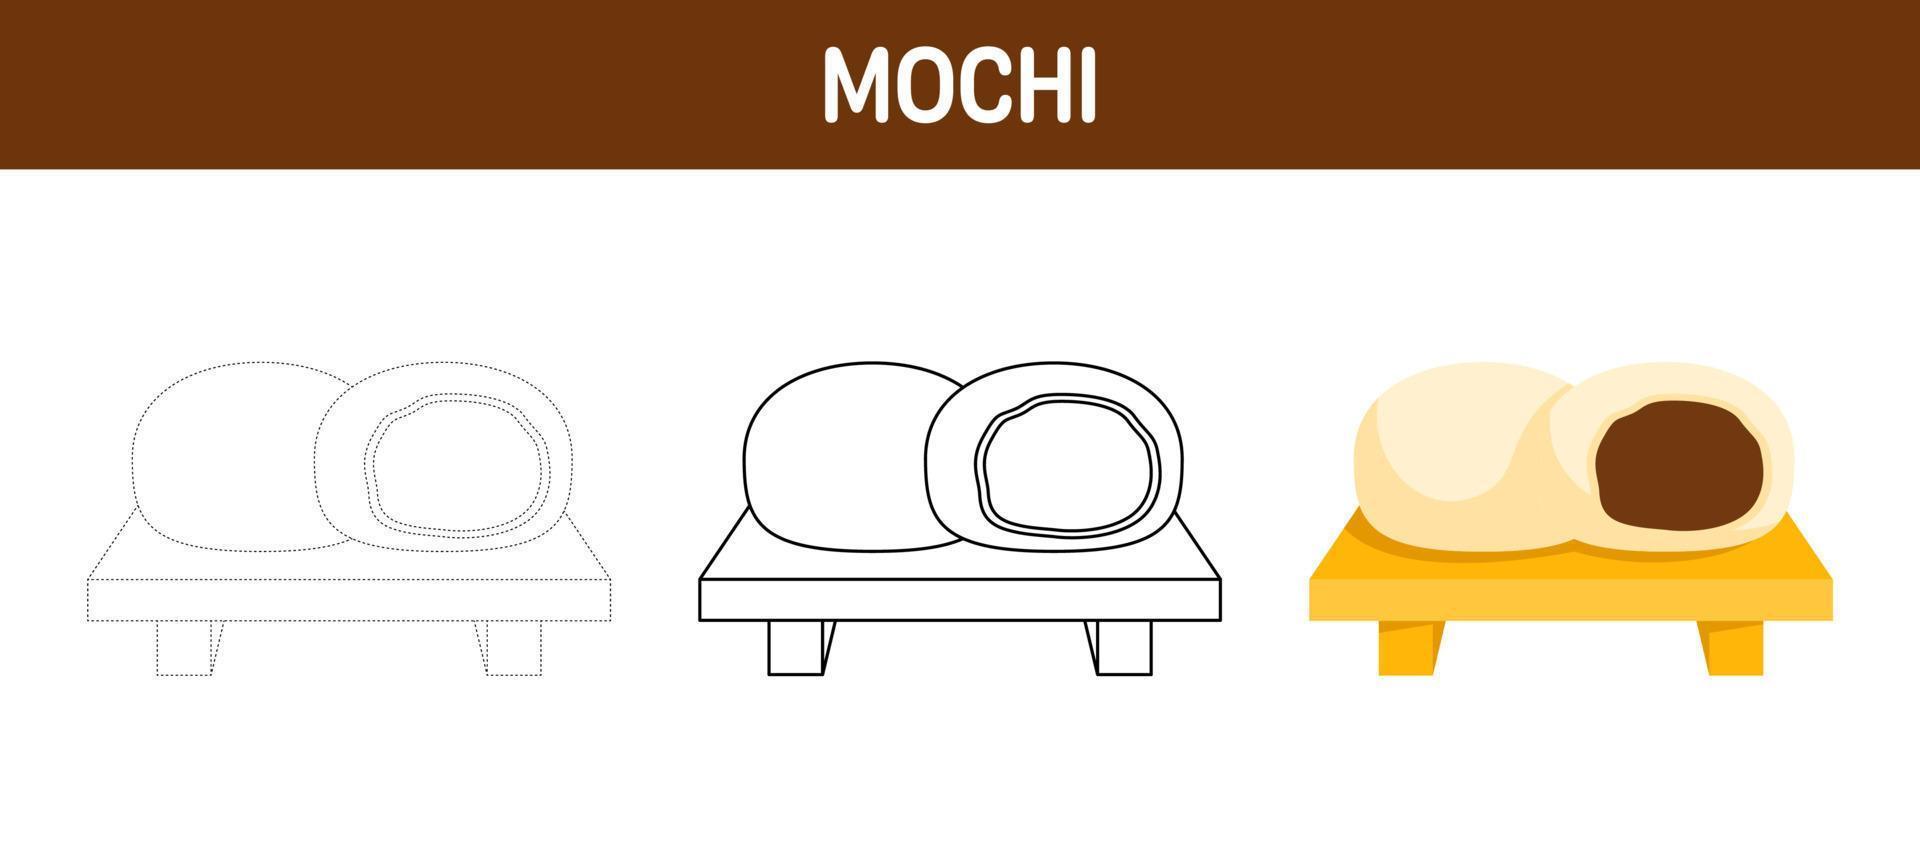 Mochi tracing and coloring worksheet for kids vector